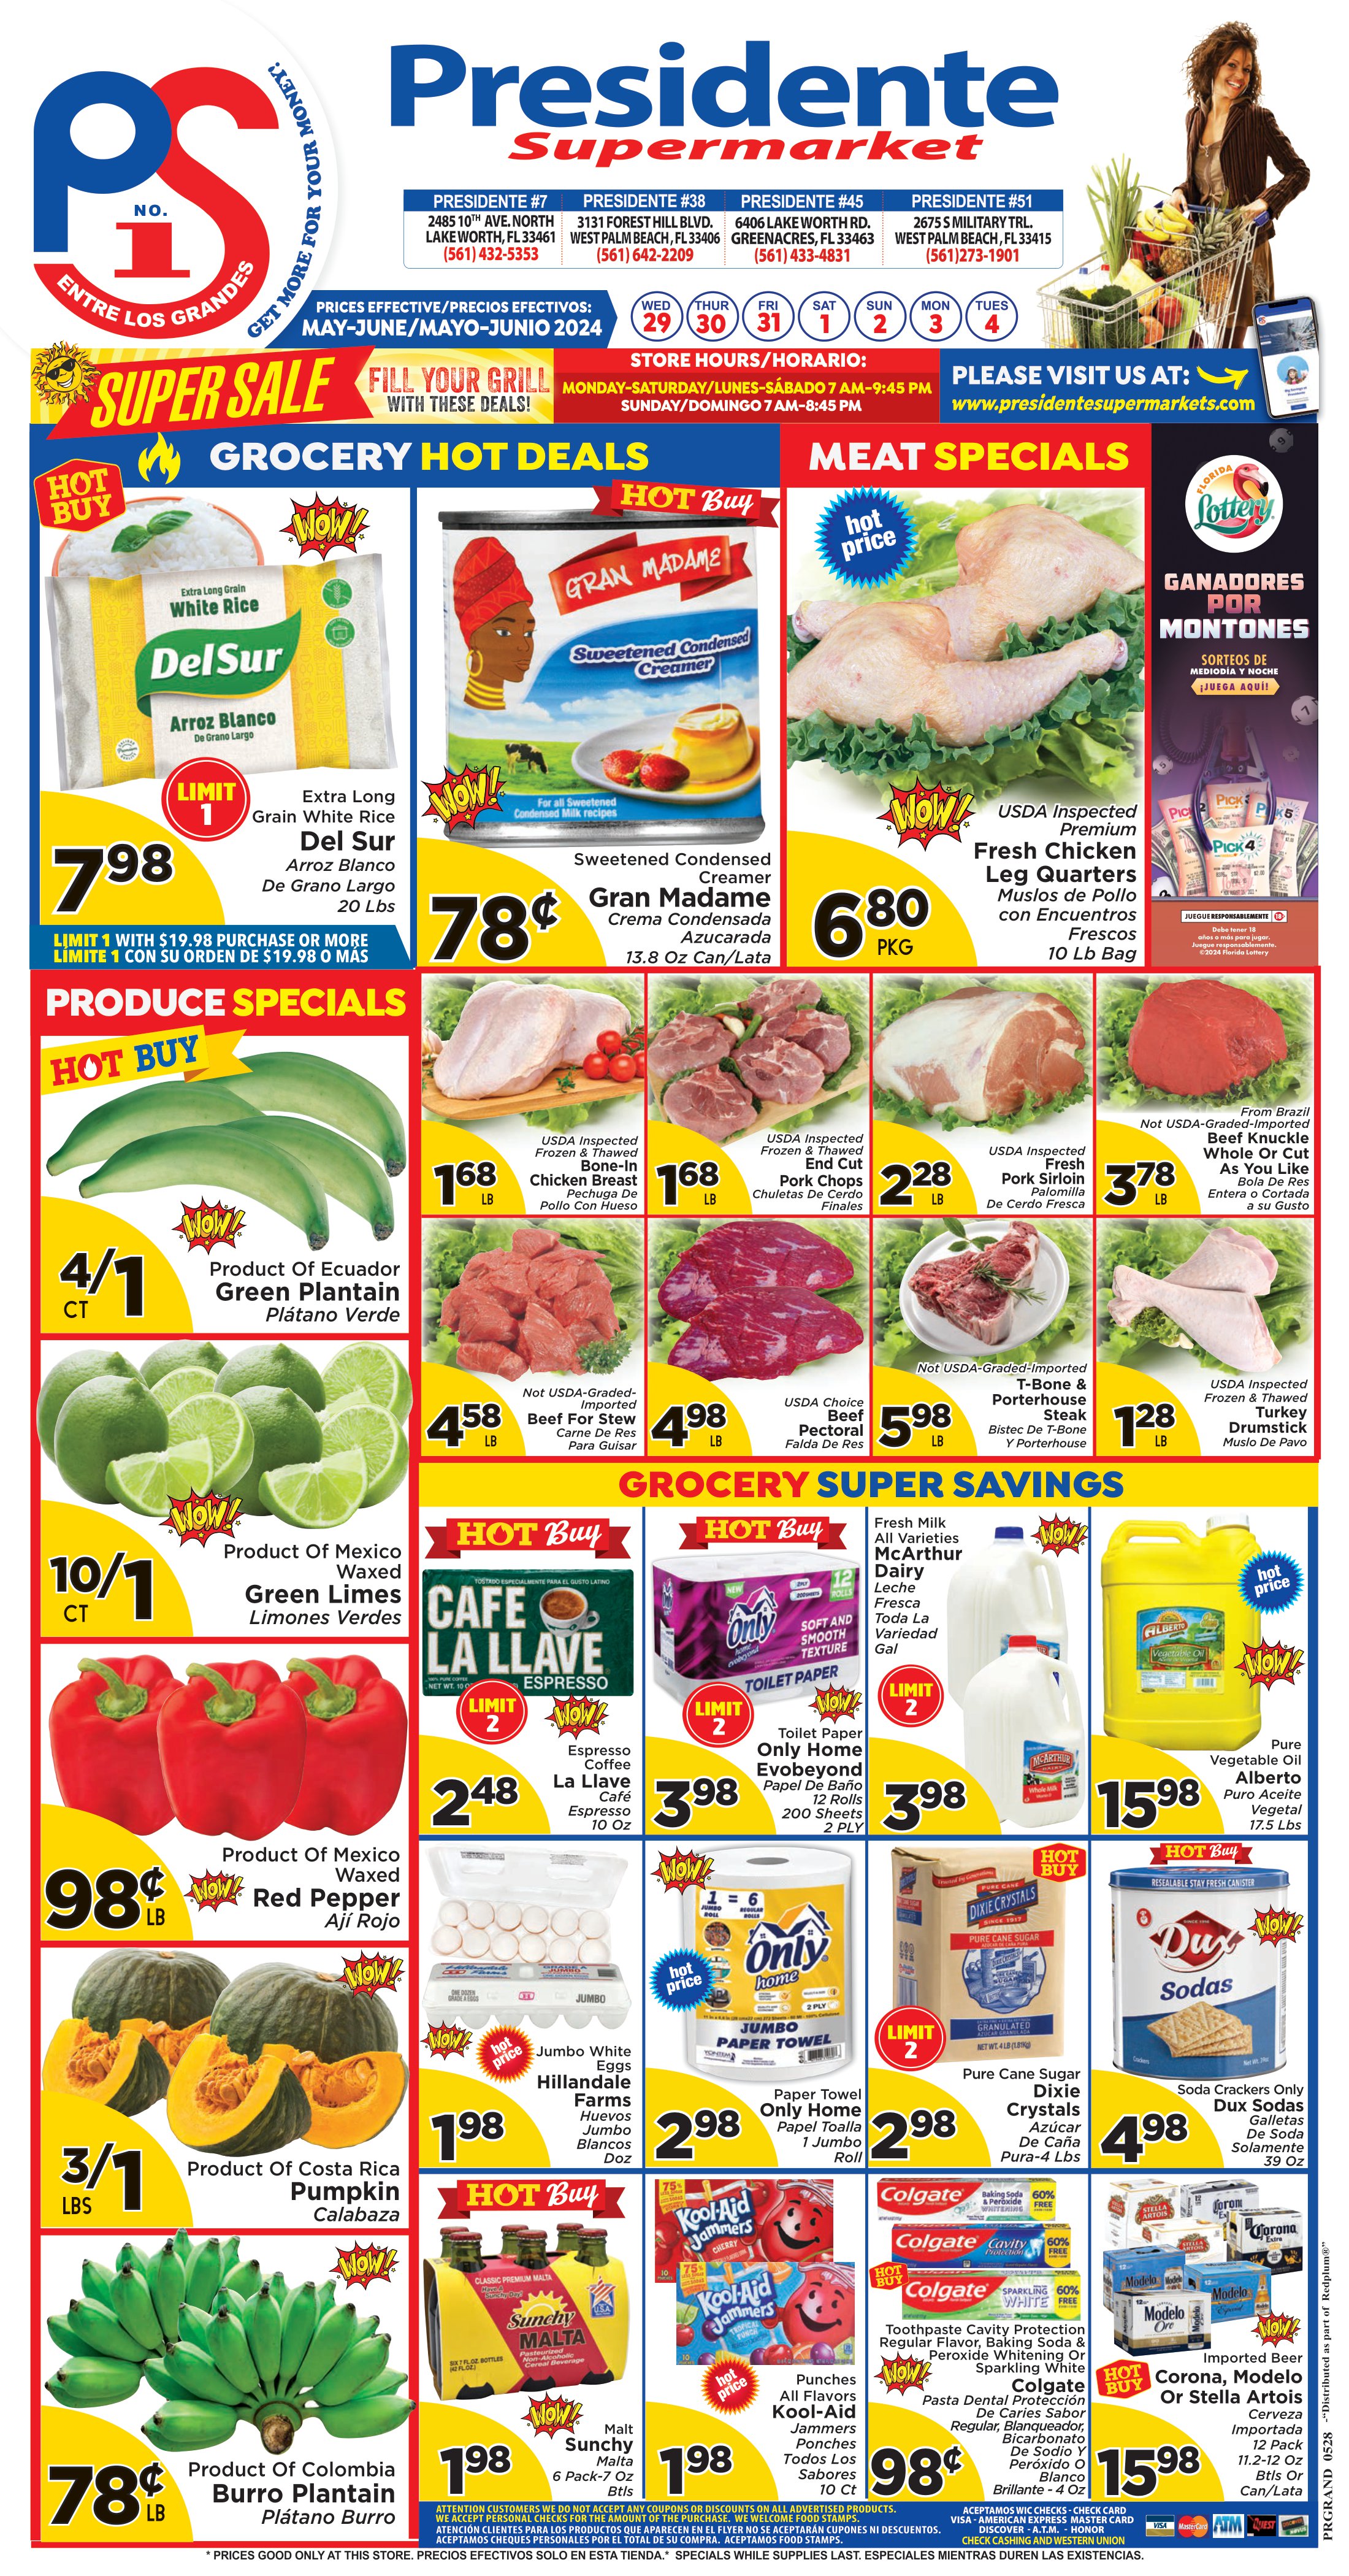 Presidente Supermarket - Weekly Promo for Stores 7, 38, 45 and 51 Page 1